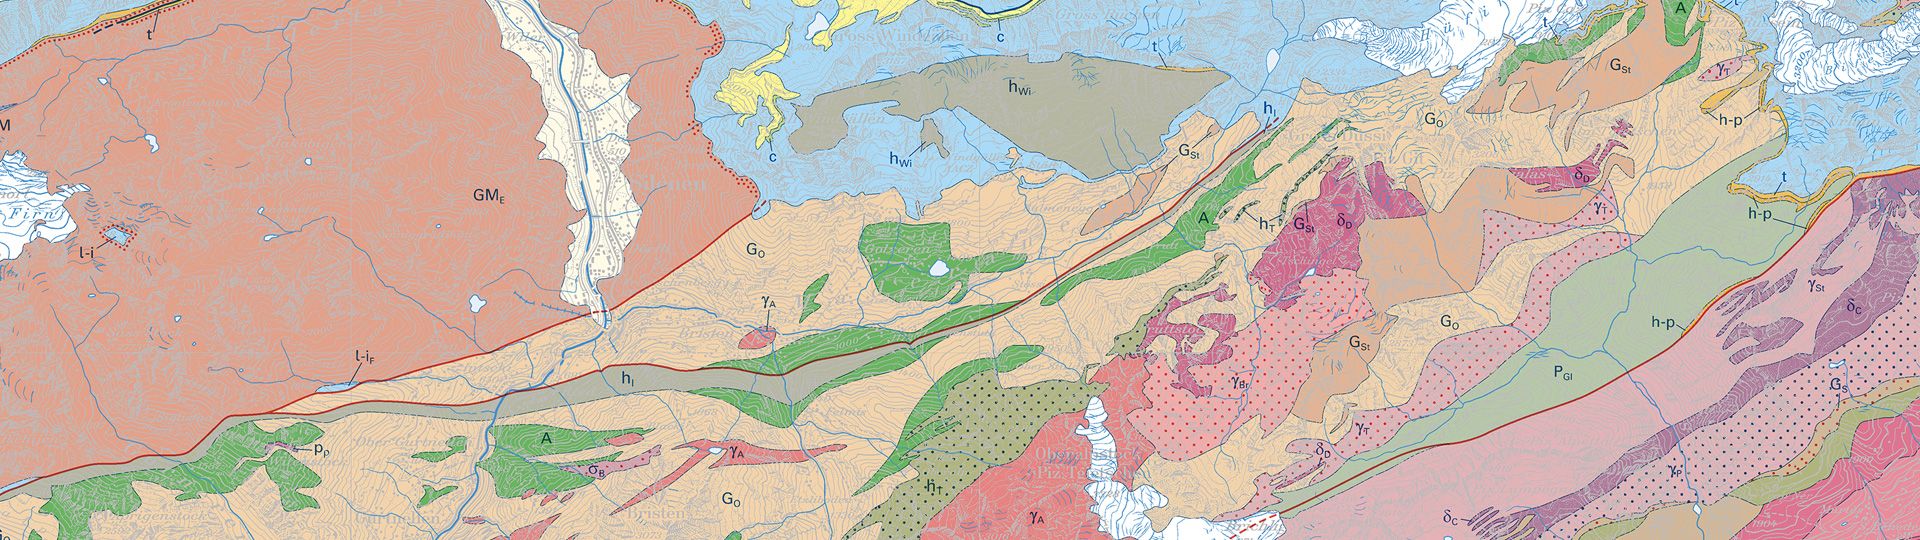 Special Geological Maps